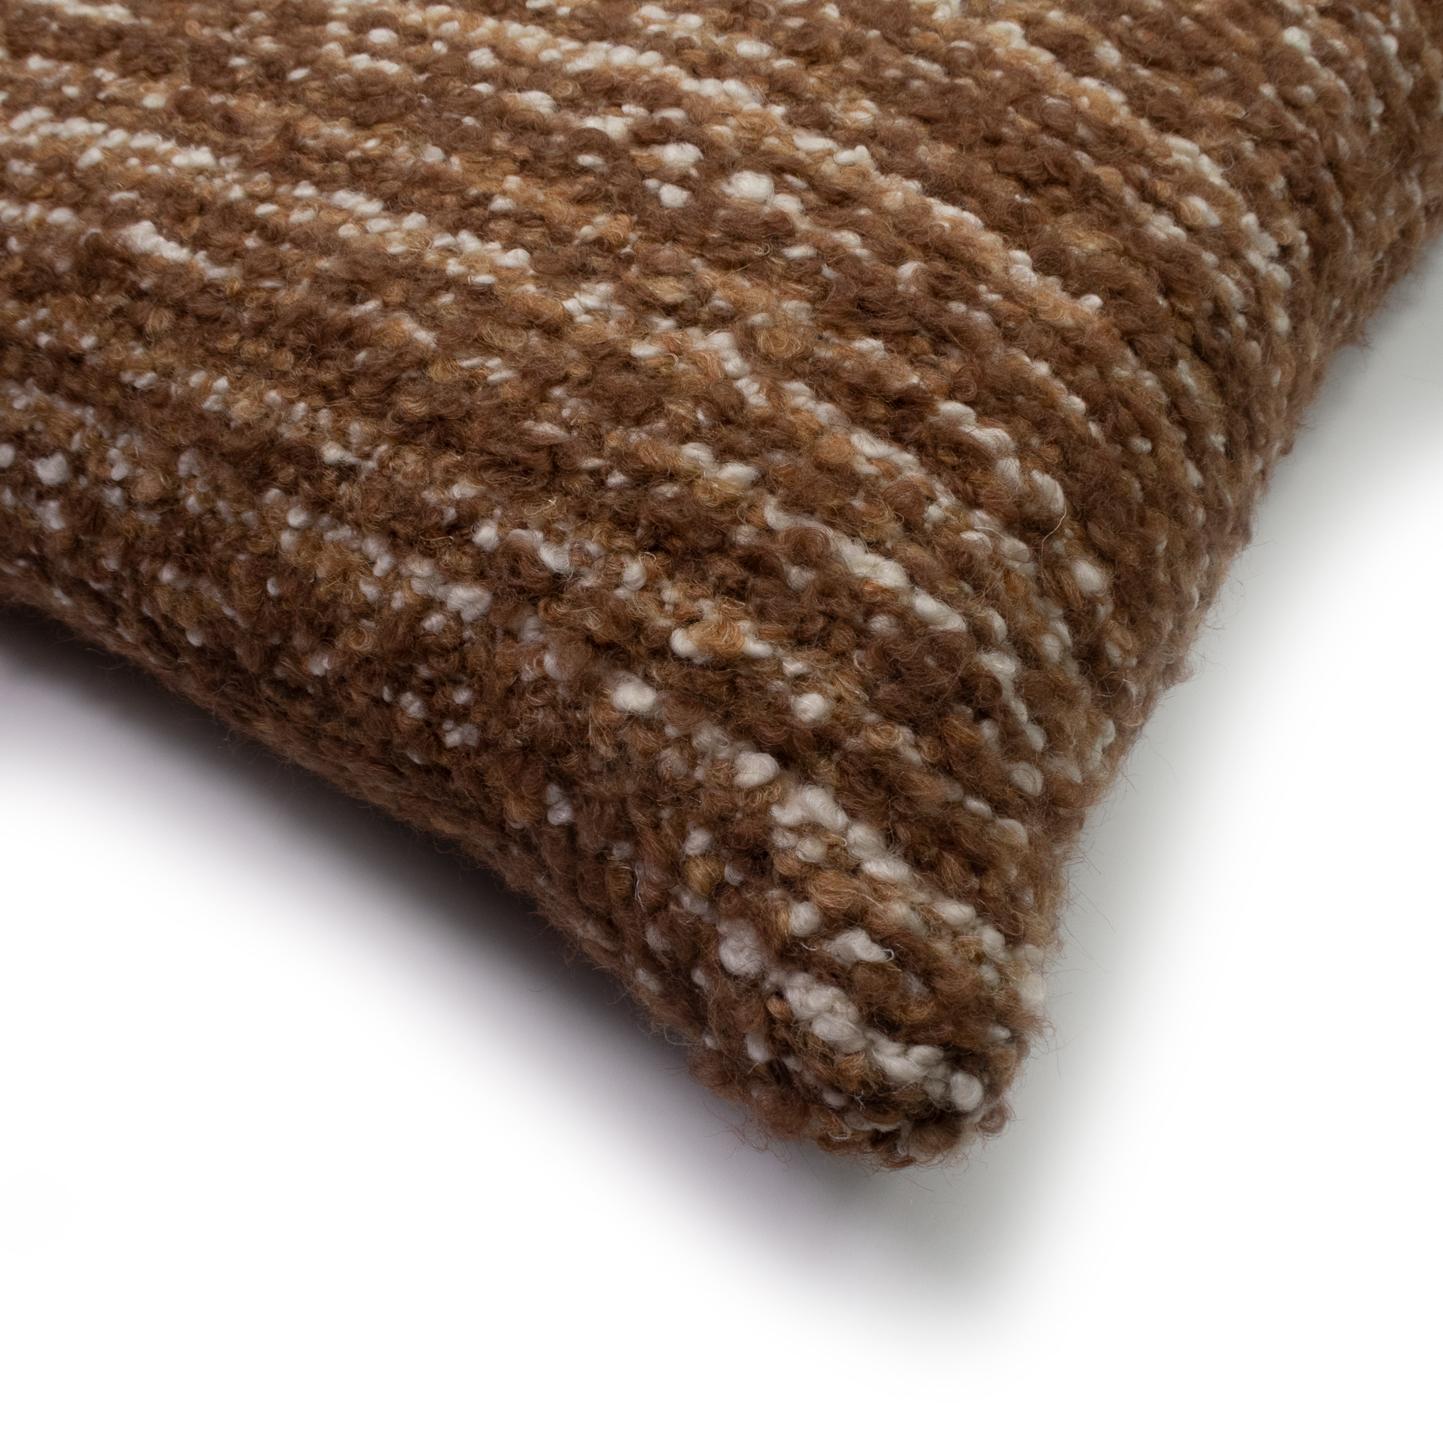 Made from premium virgin wool, this fabric guarantees comfort on fabric upholstery and soft furnishings. The Colorado fabric echoes the same aesthetic of the state after which it's named, with it varied ridges resembling numerous canyons that